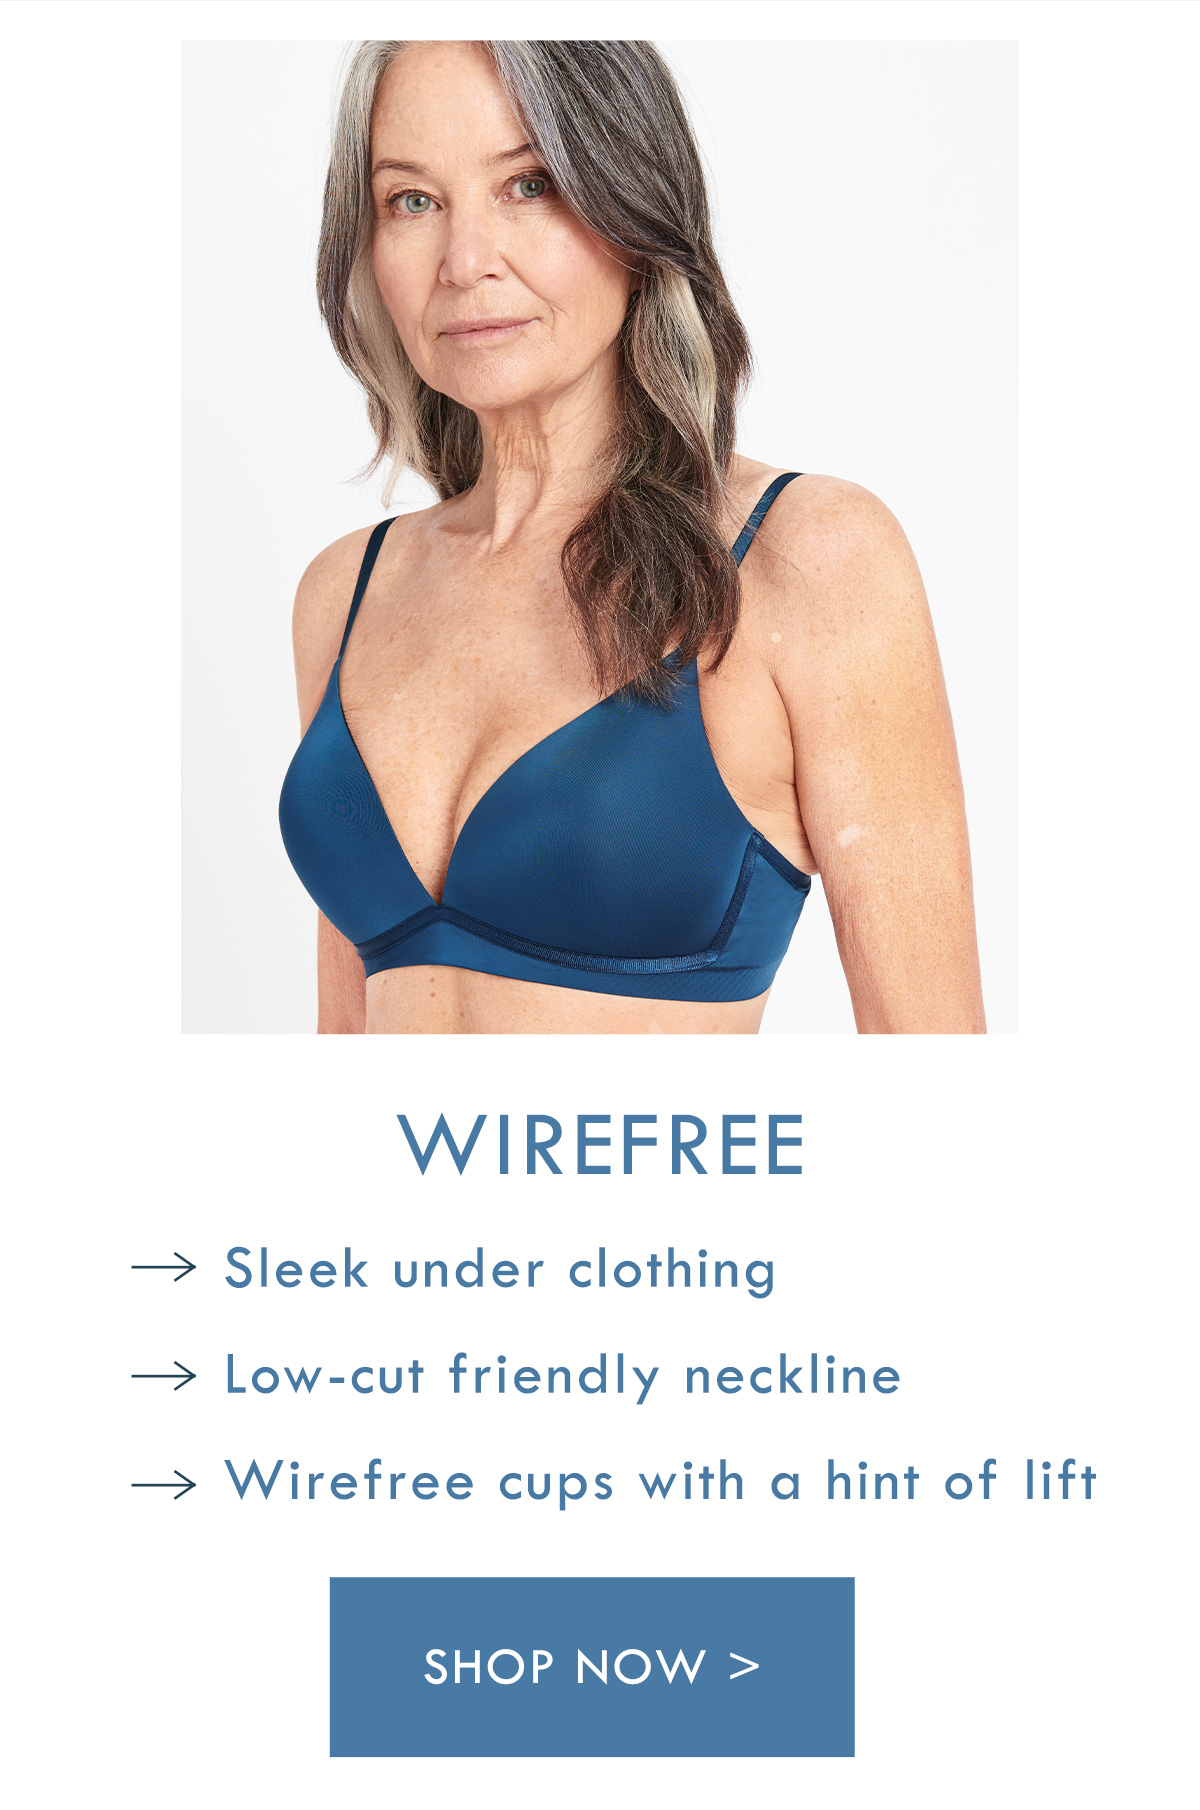 Wirefree. Sleek under clothing. Low-cut friendly neckline. Wirefree cups with a hint of lift. Shop Now.